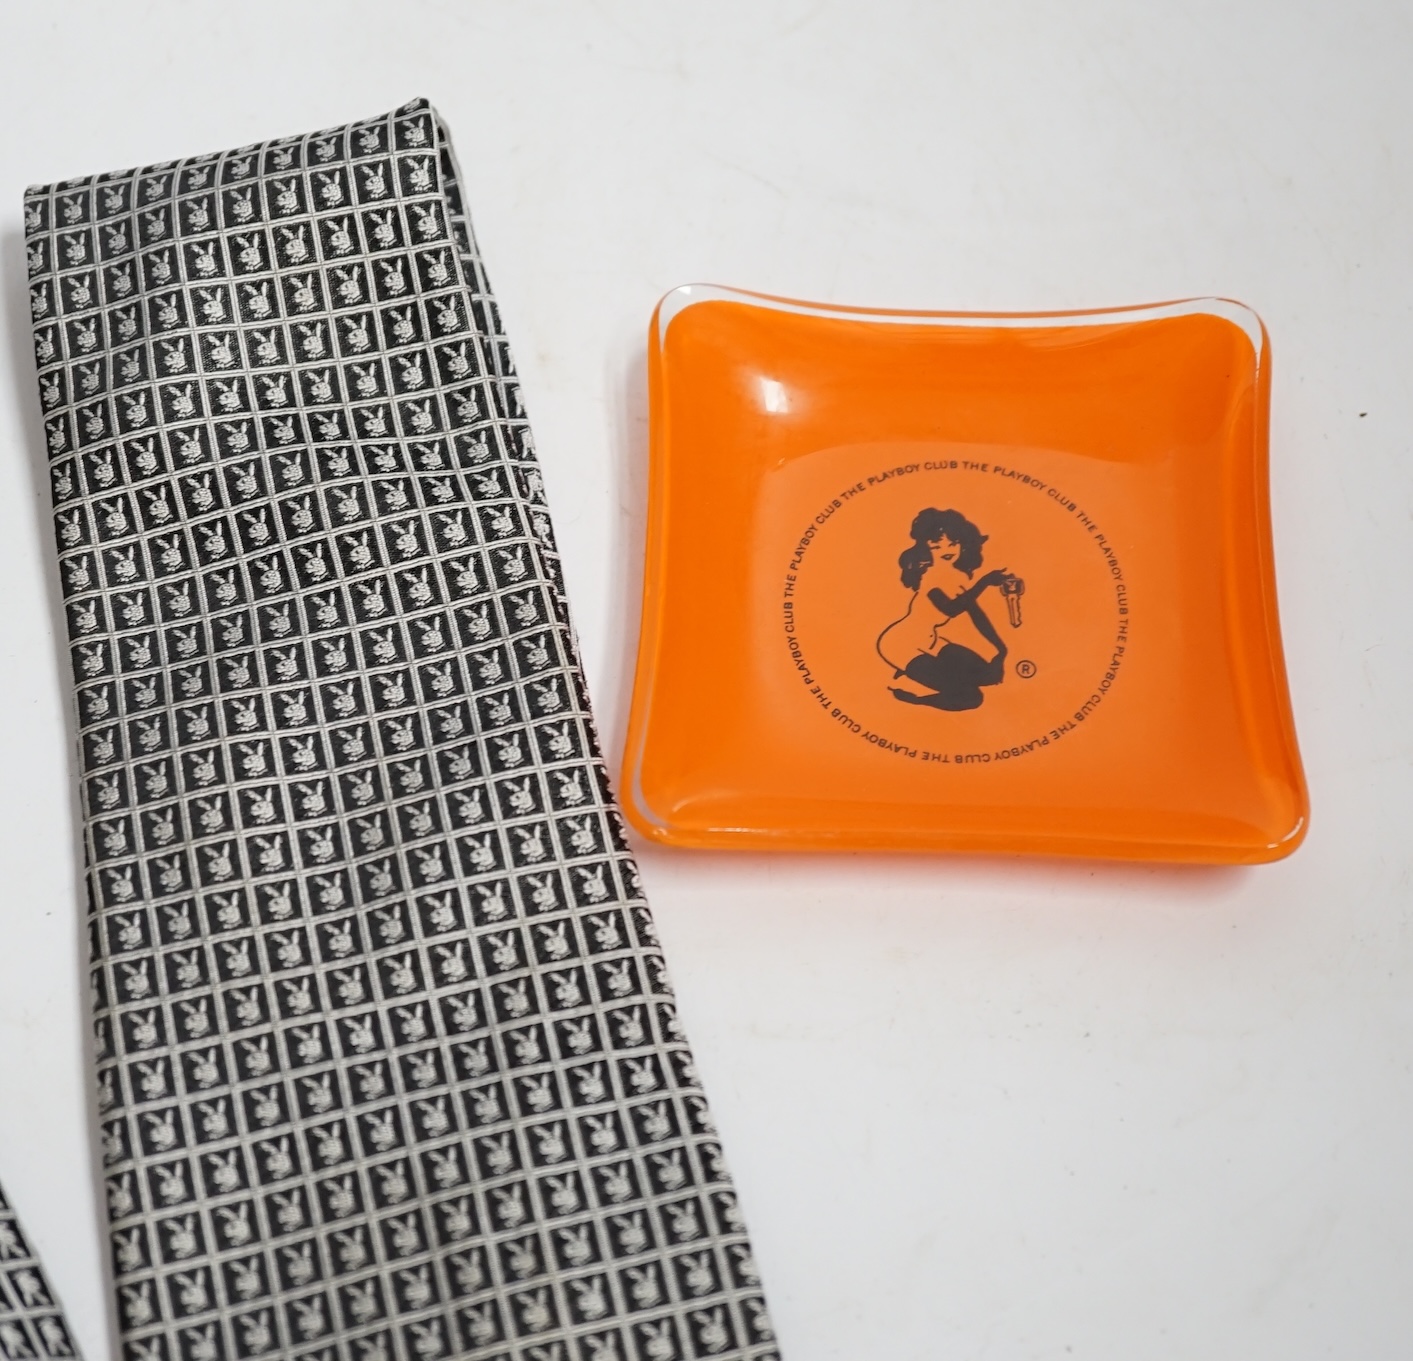 Playboy memorabilia: a tie, an ash tray, two packs of matches, a towel and a pair of cuff links